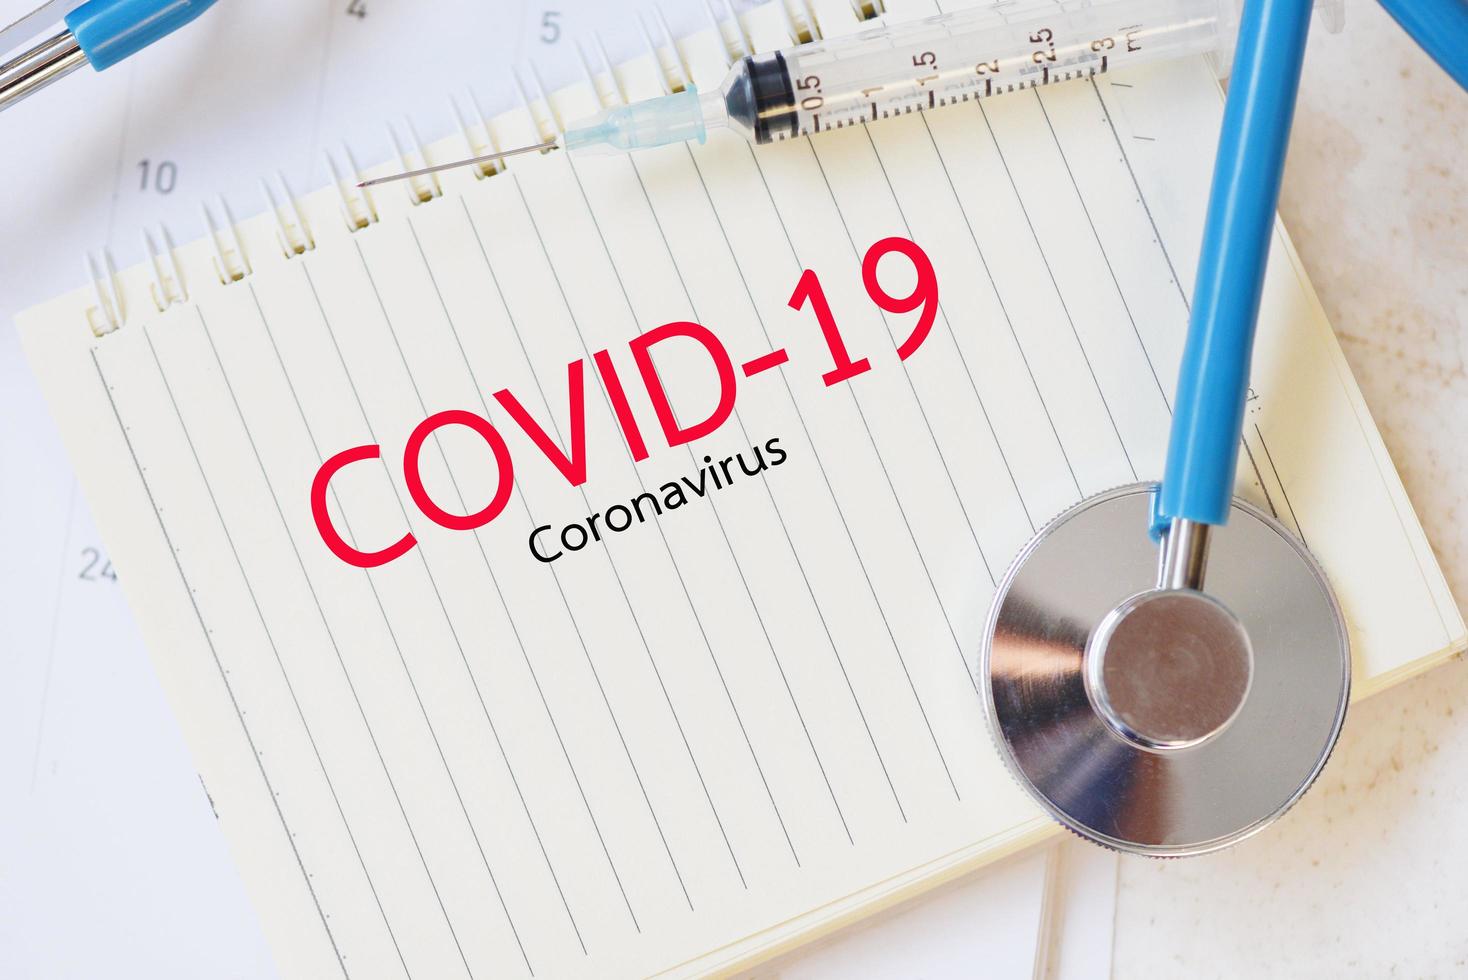 COVID-19 coronavirus concept with syringe injection medication drug and stethoscope on paper notebook Coronavirus spread influenza medical crisis pandemic public health risk prevention photo